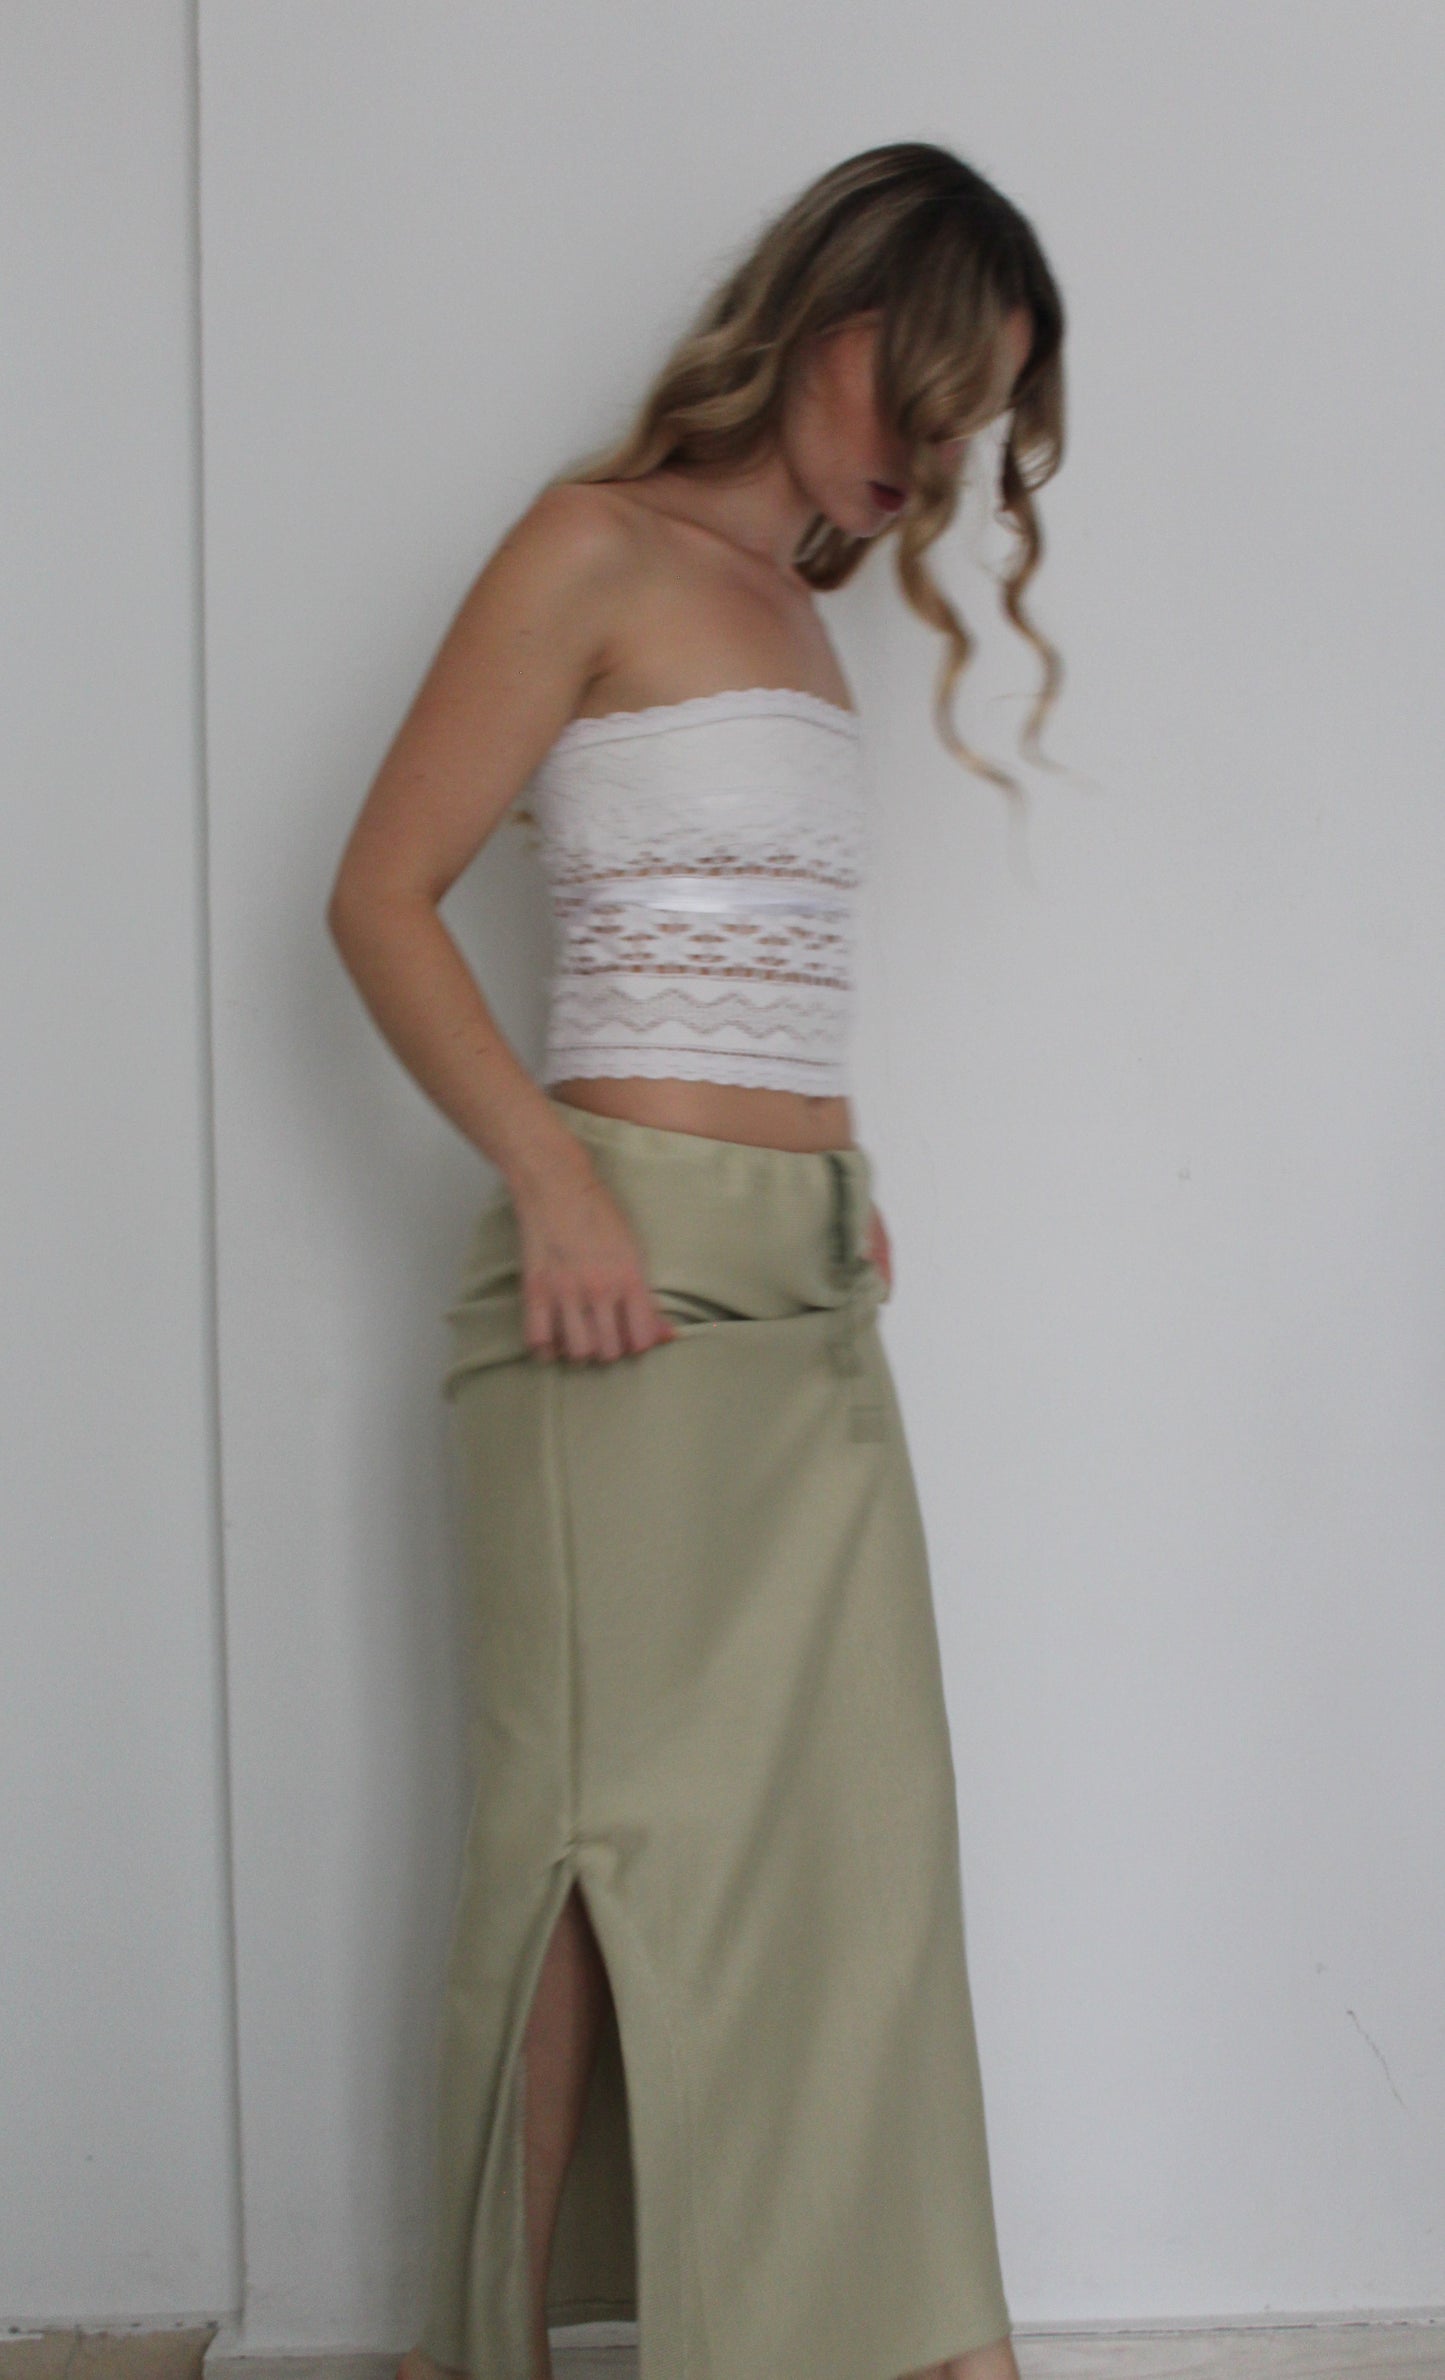 The Knit Skirt (In Sage Green)